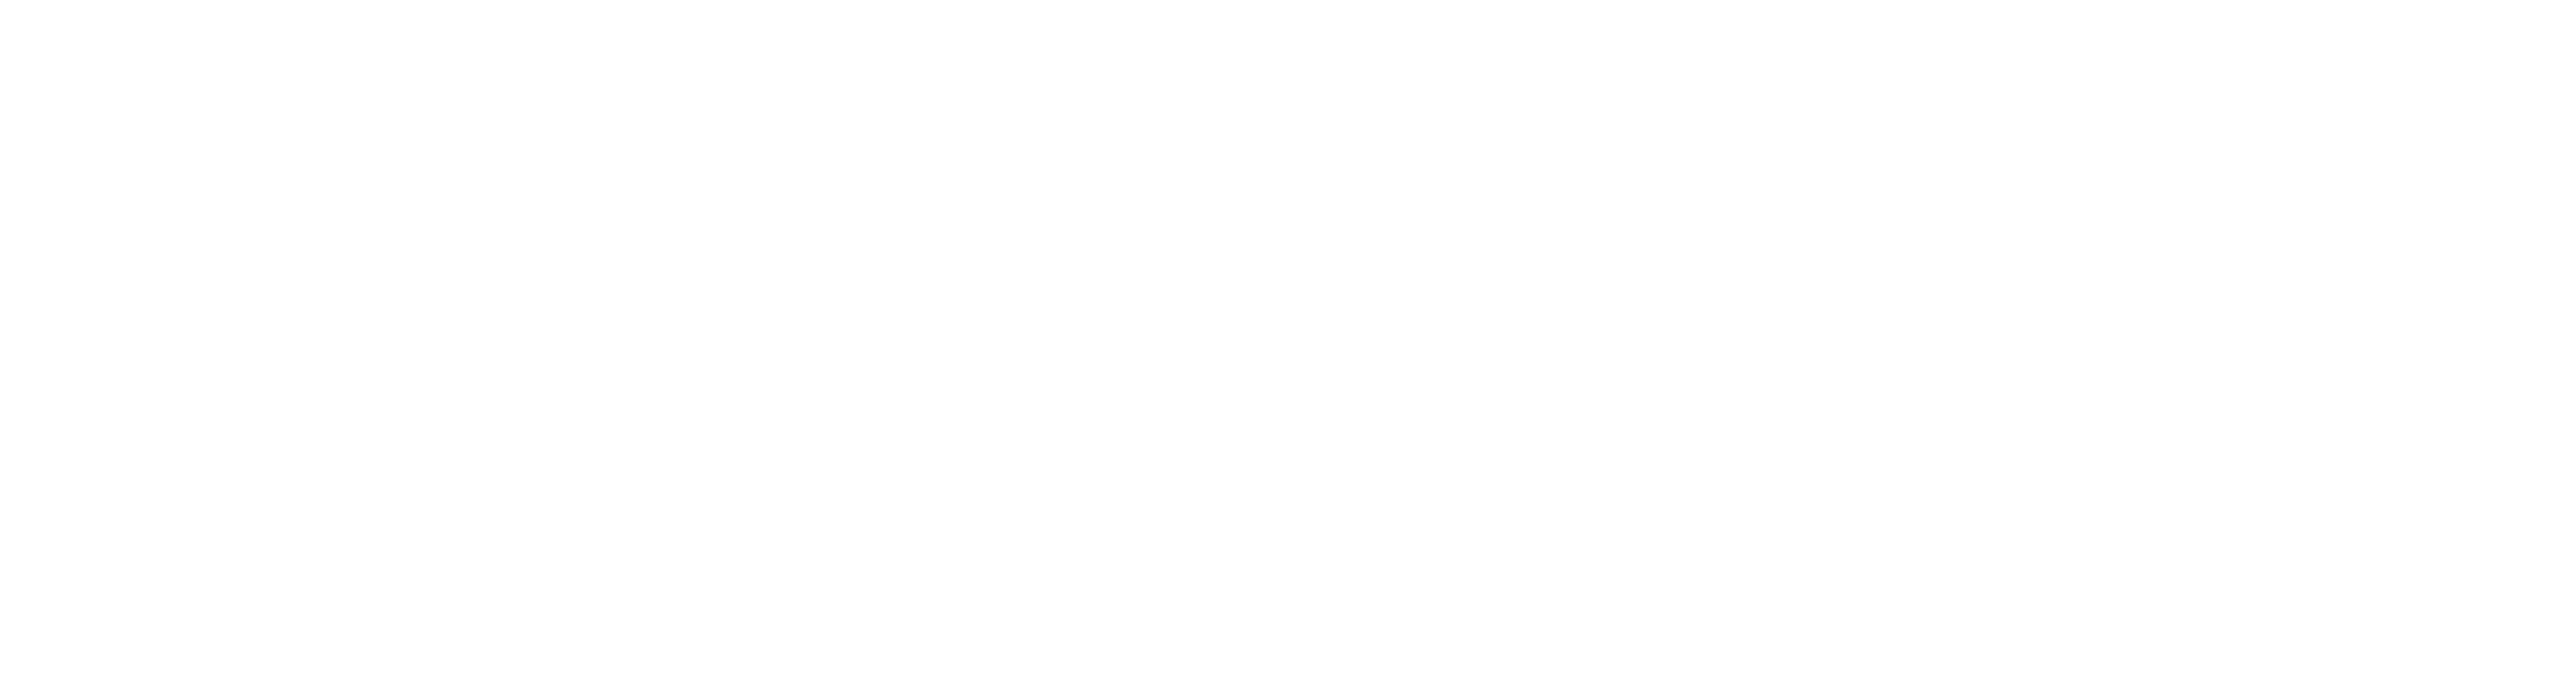 Almont New Church Assembly Logo